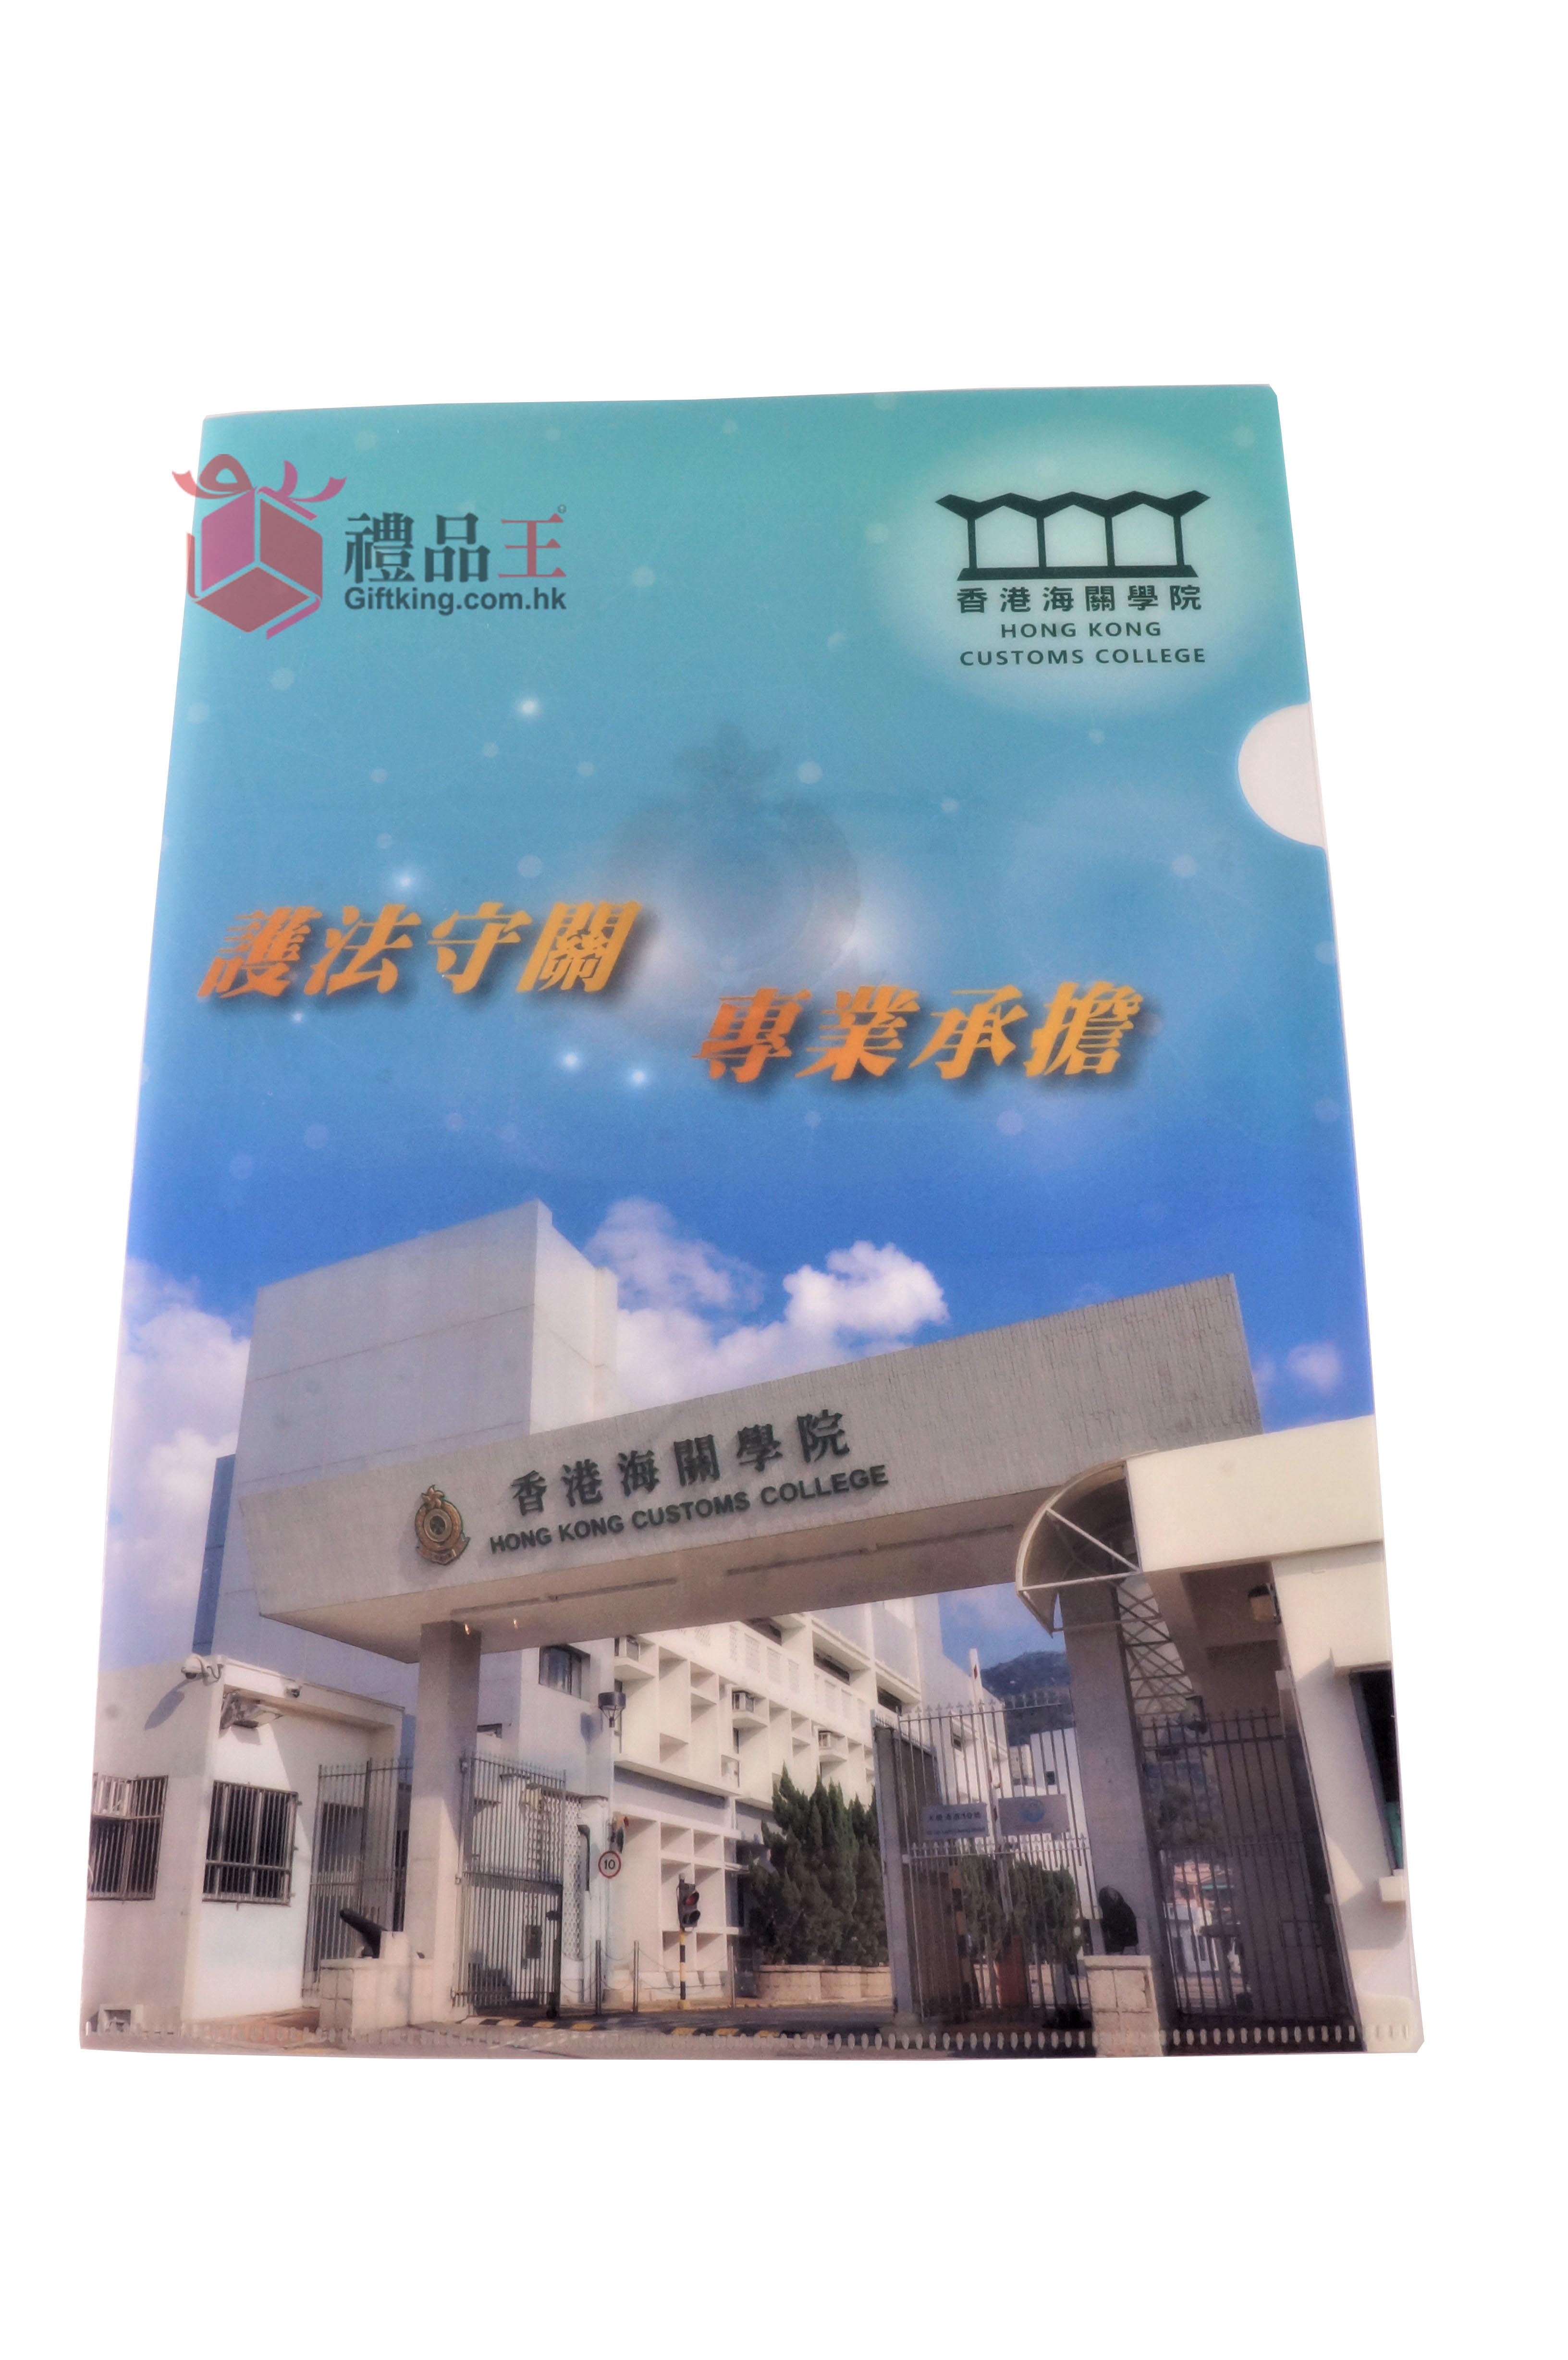 Hong Kong Customs College View Of College Cover Designed A4 File (Stationery Gift)